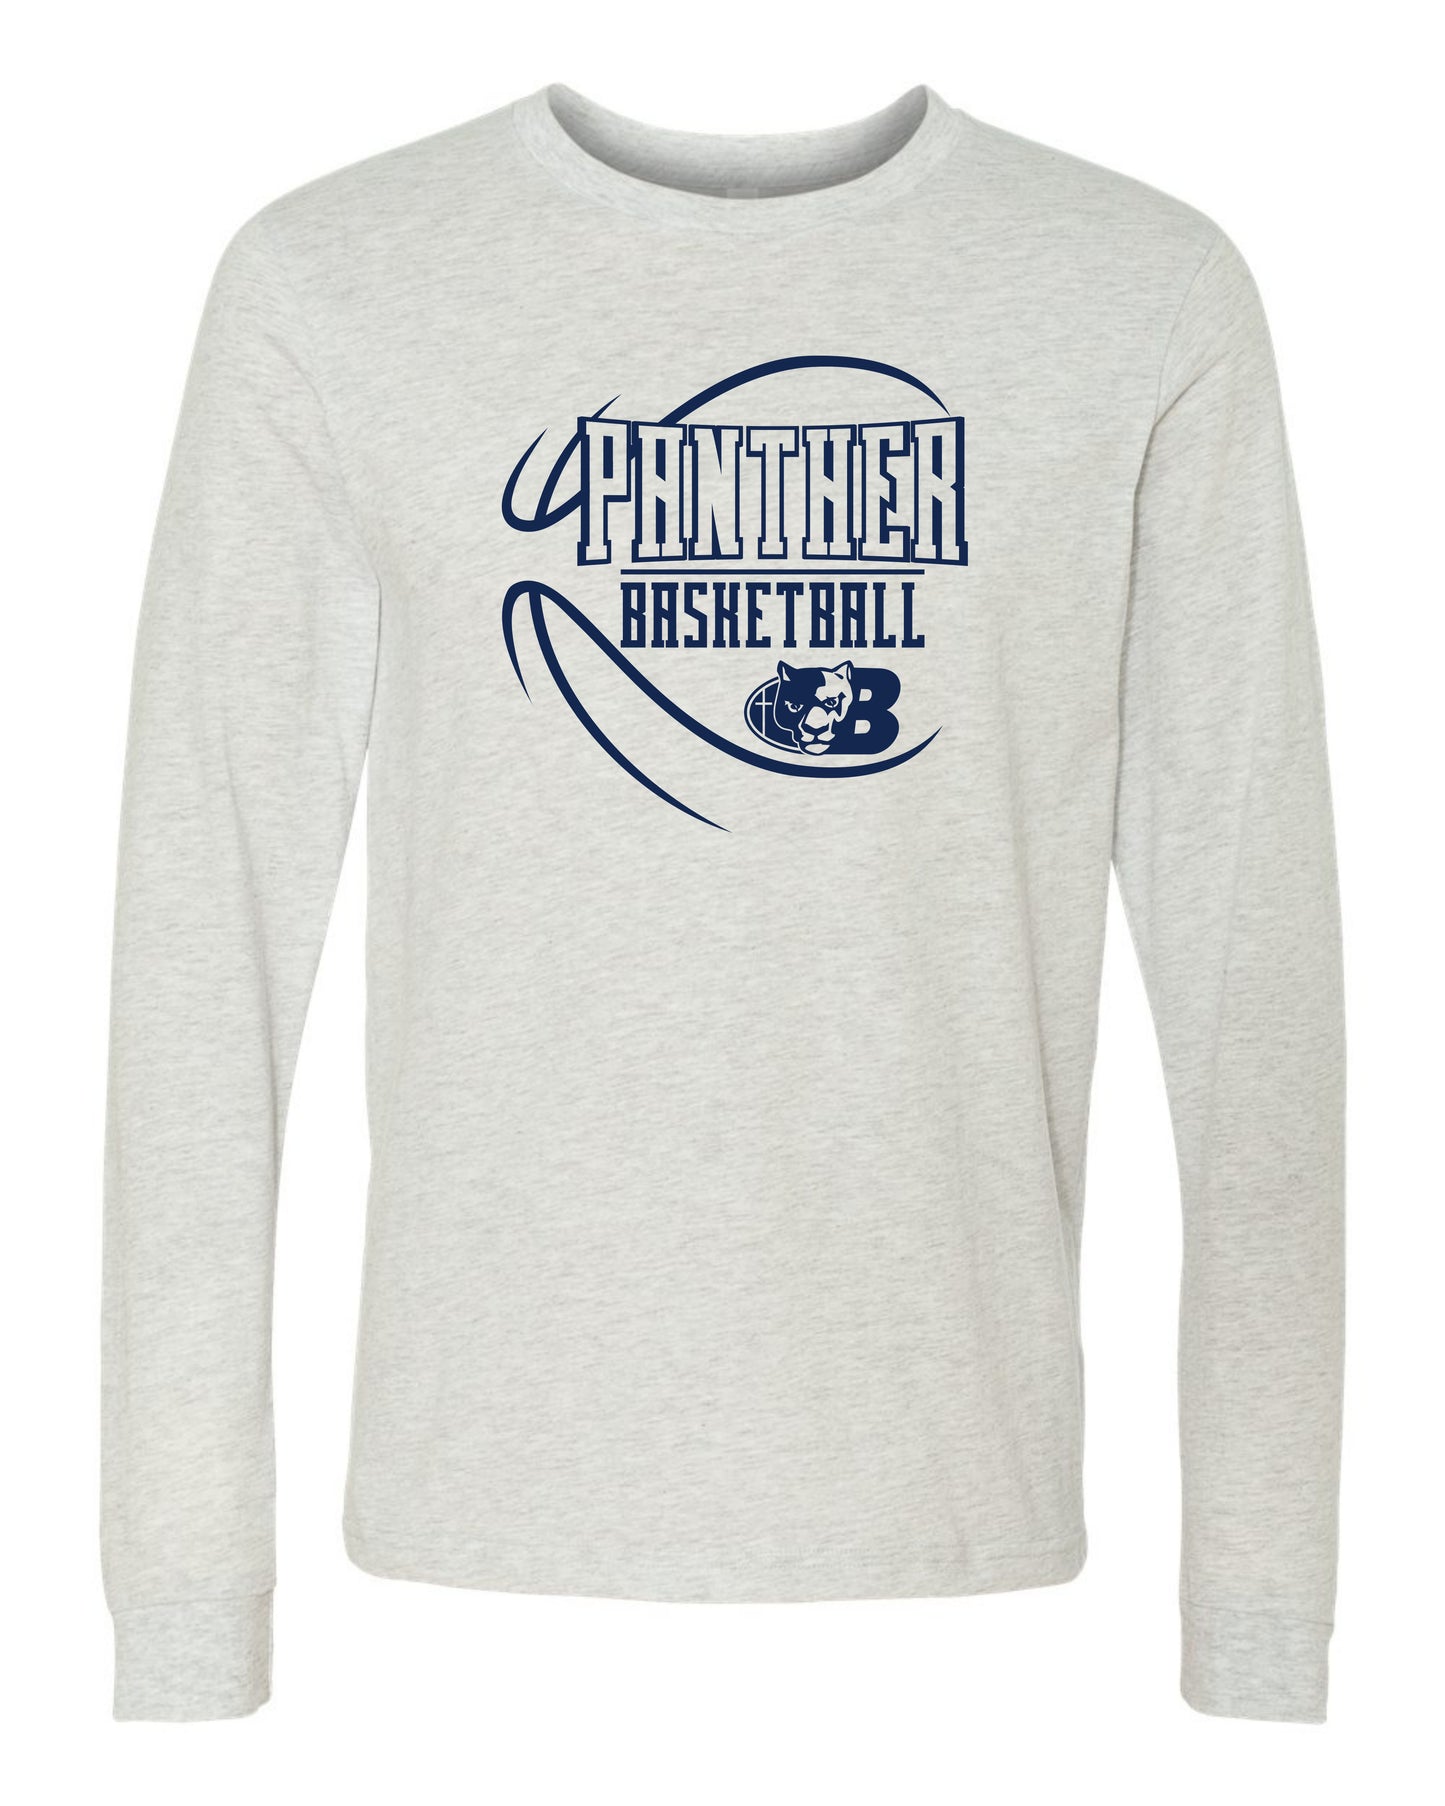 Panther BBall Abstract Ball - Adult Long Sleeve